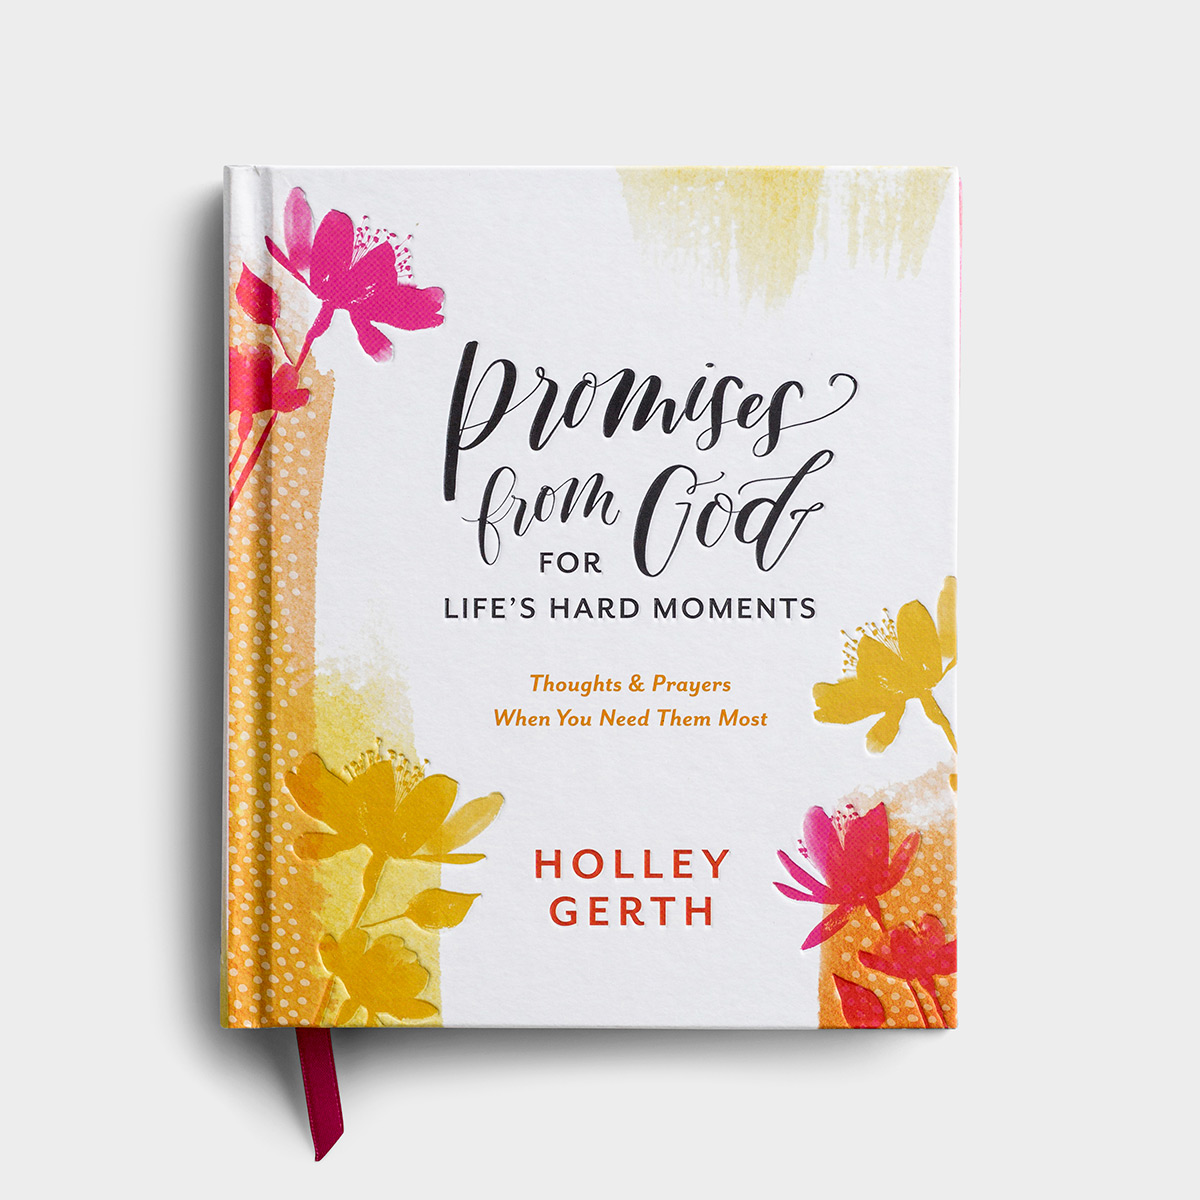 Holley Gerth - Bible Promises Gift Book, Prayers to Share & Perpetual Calendar - Gift Set